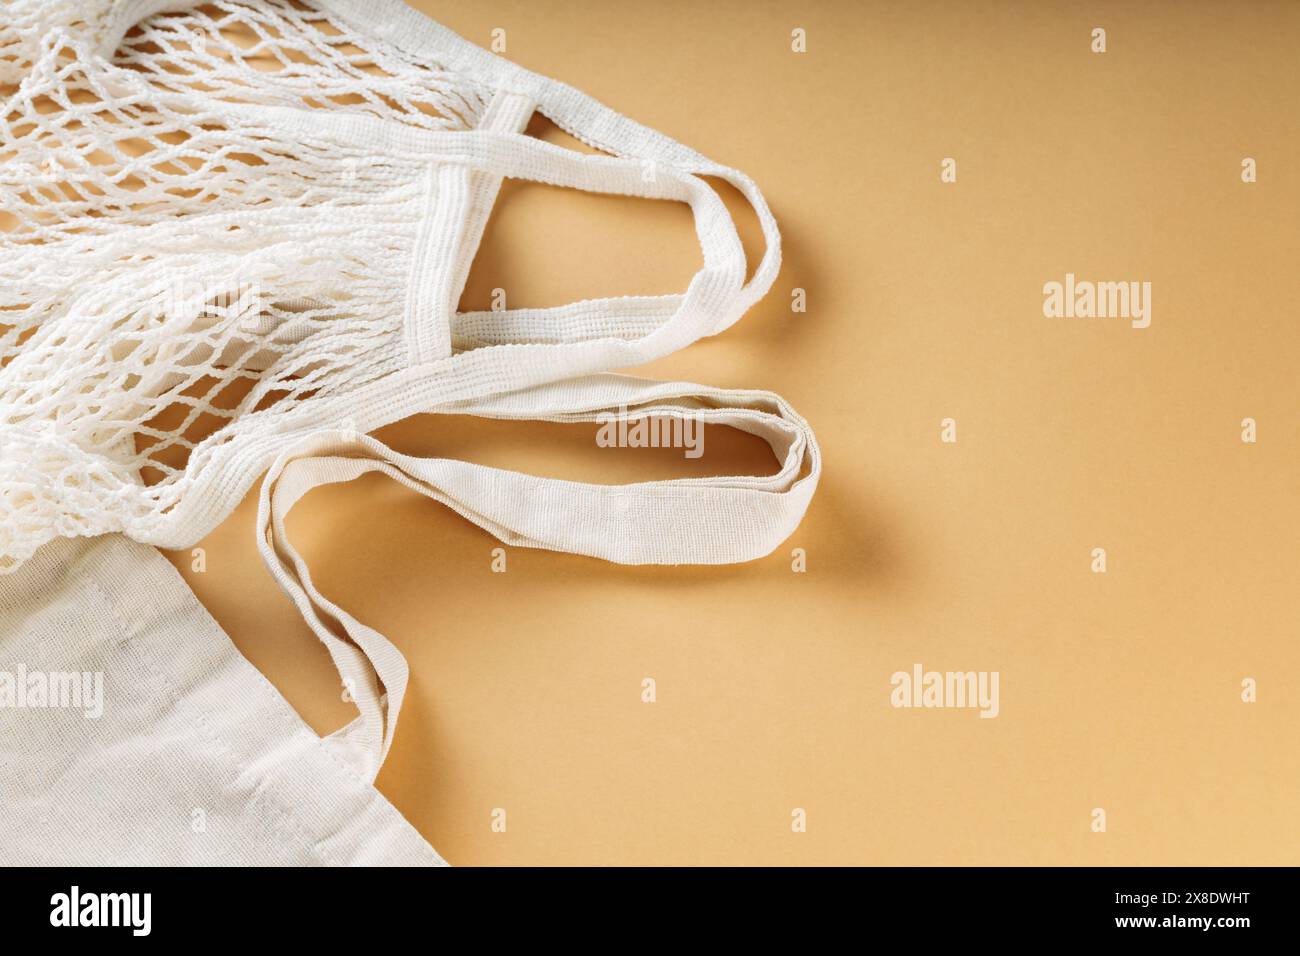 Cotton Bags Promoting Pollution Reduction, Sustainable Shopping Concept Stock Photo